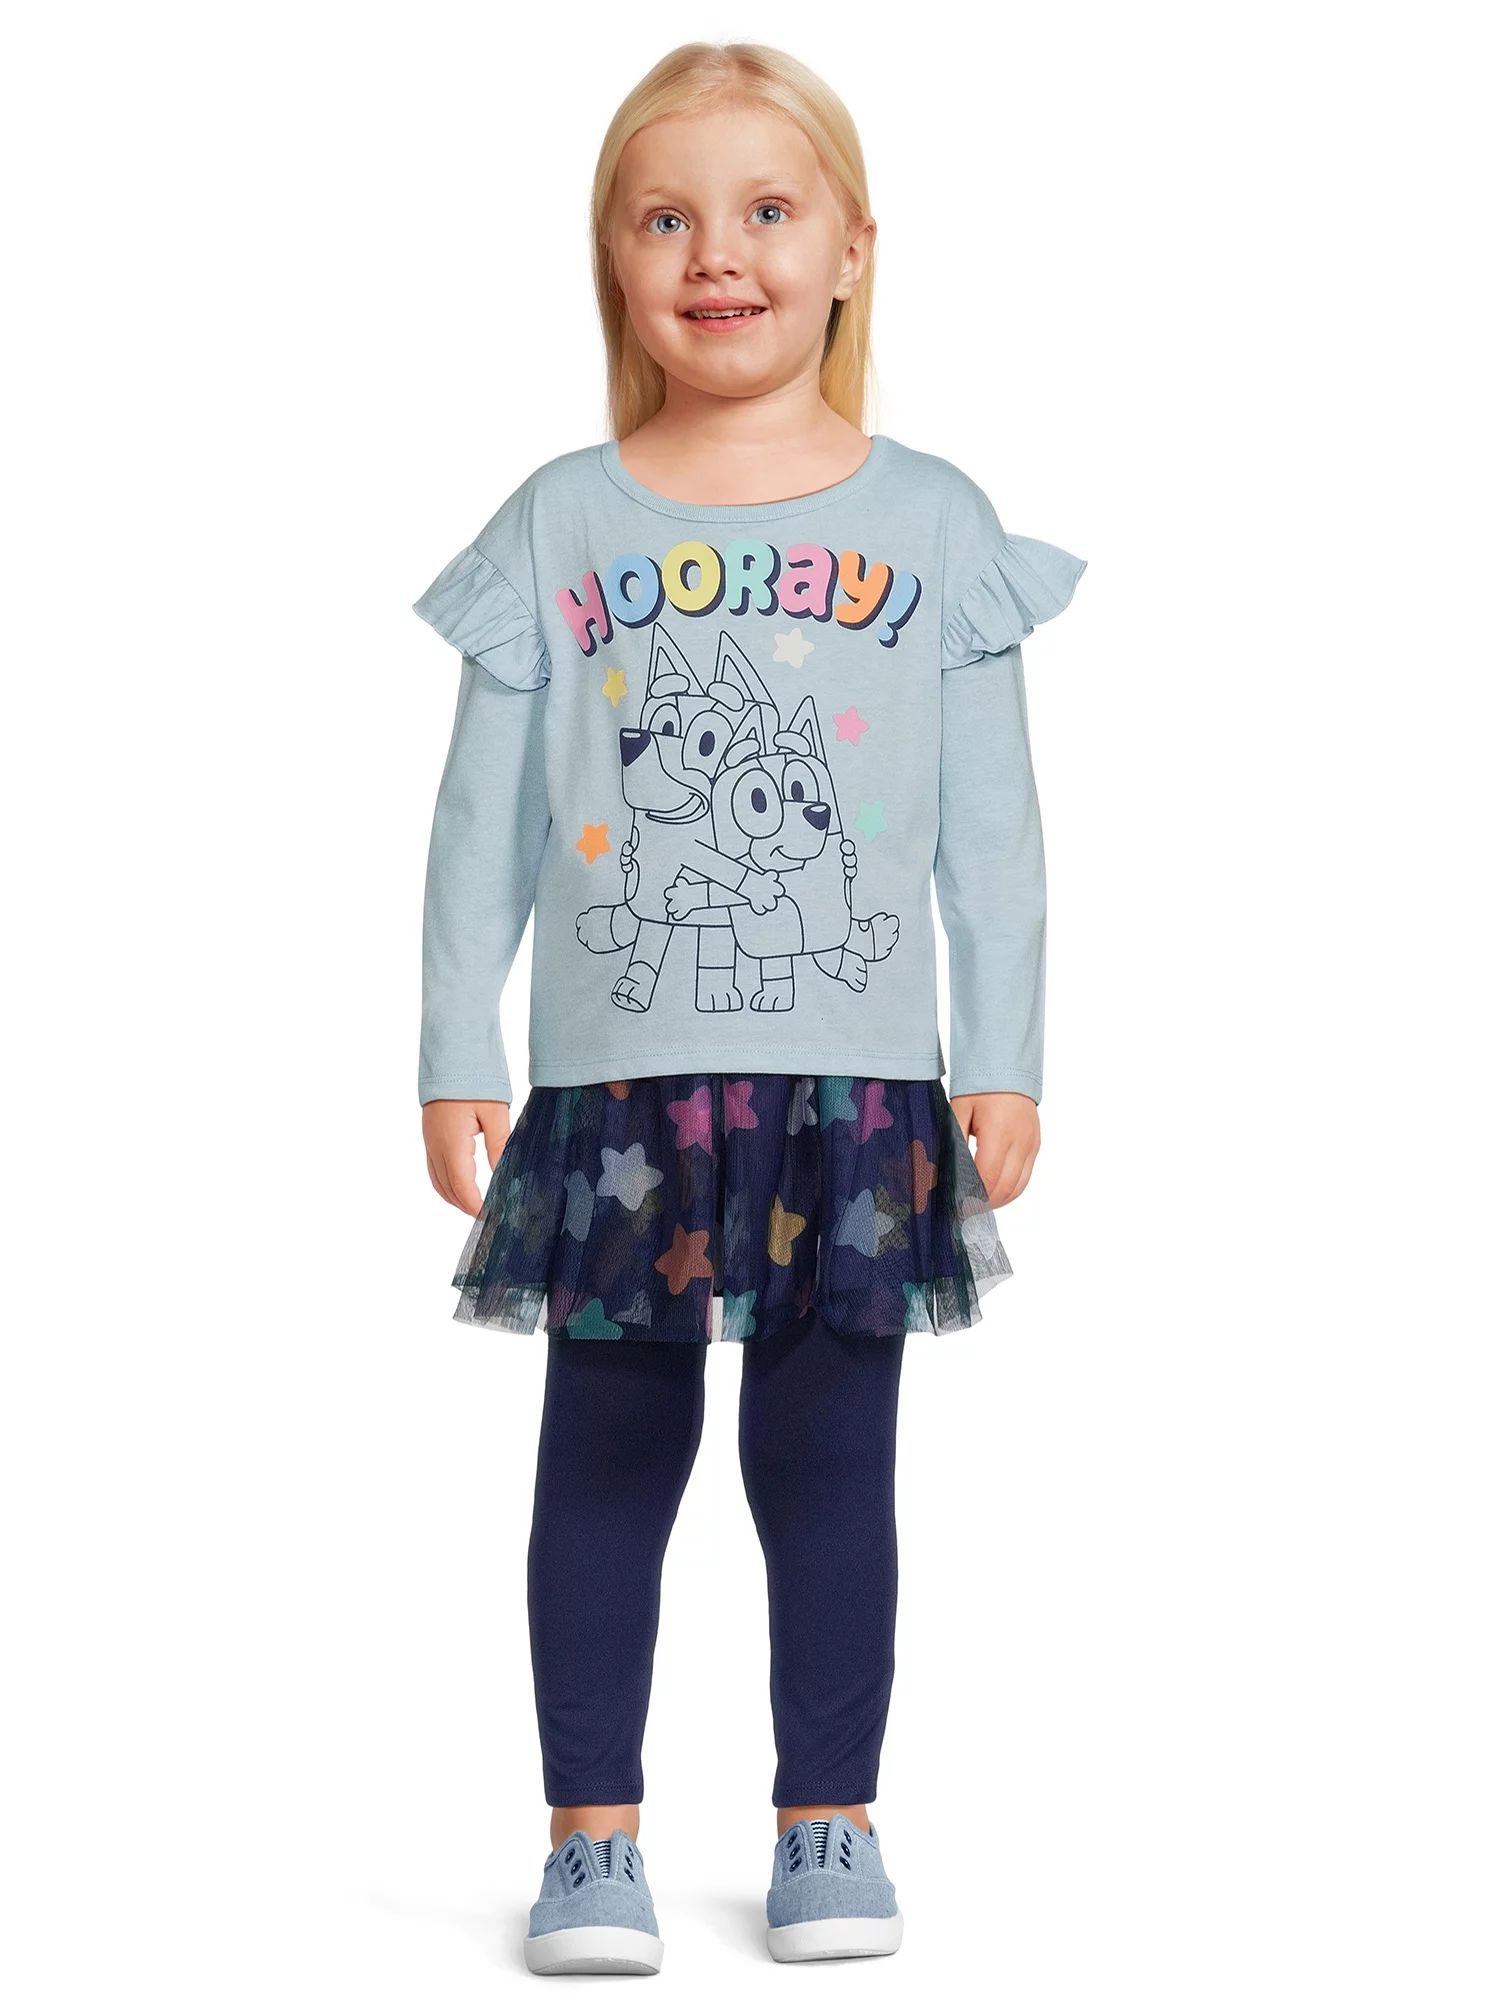 Bluey Toddler Girl Role Play Set, 4-Piece, Sizes 2T-5T | Walmart (US)